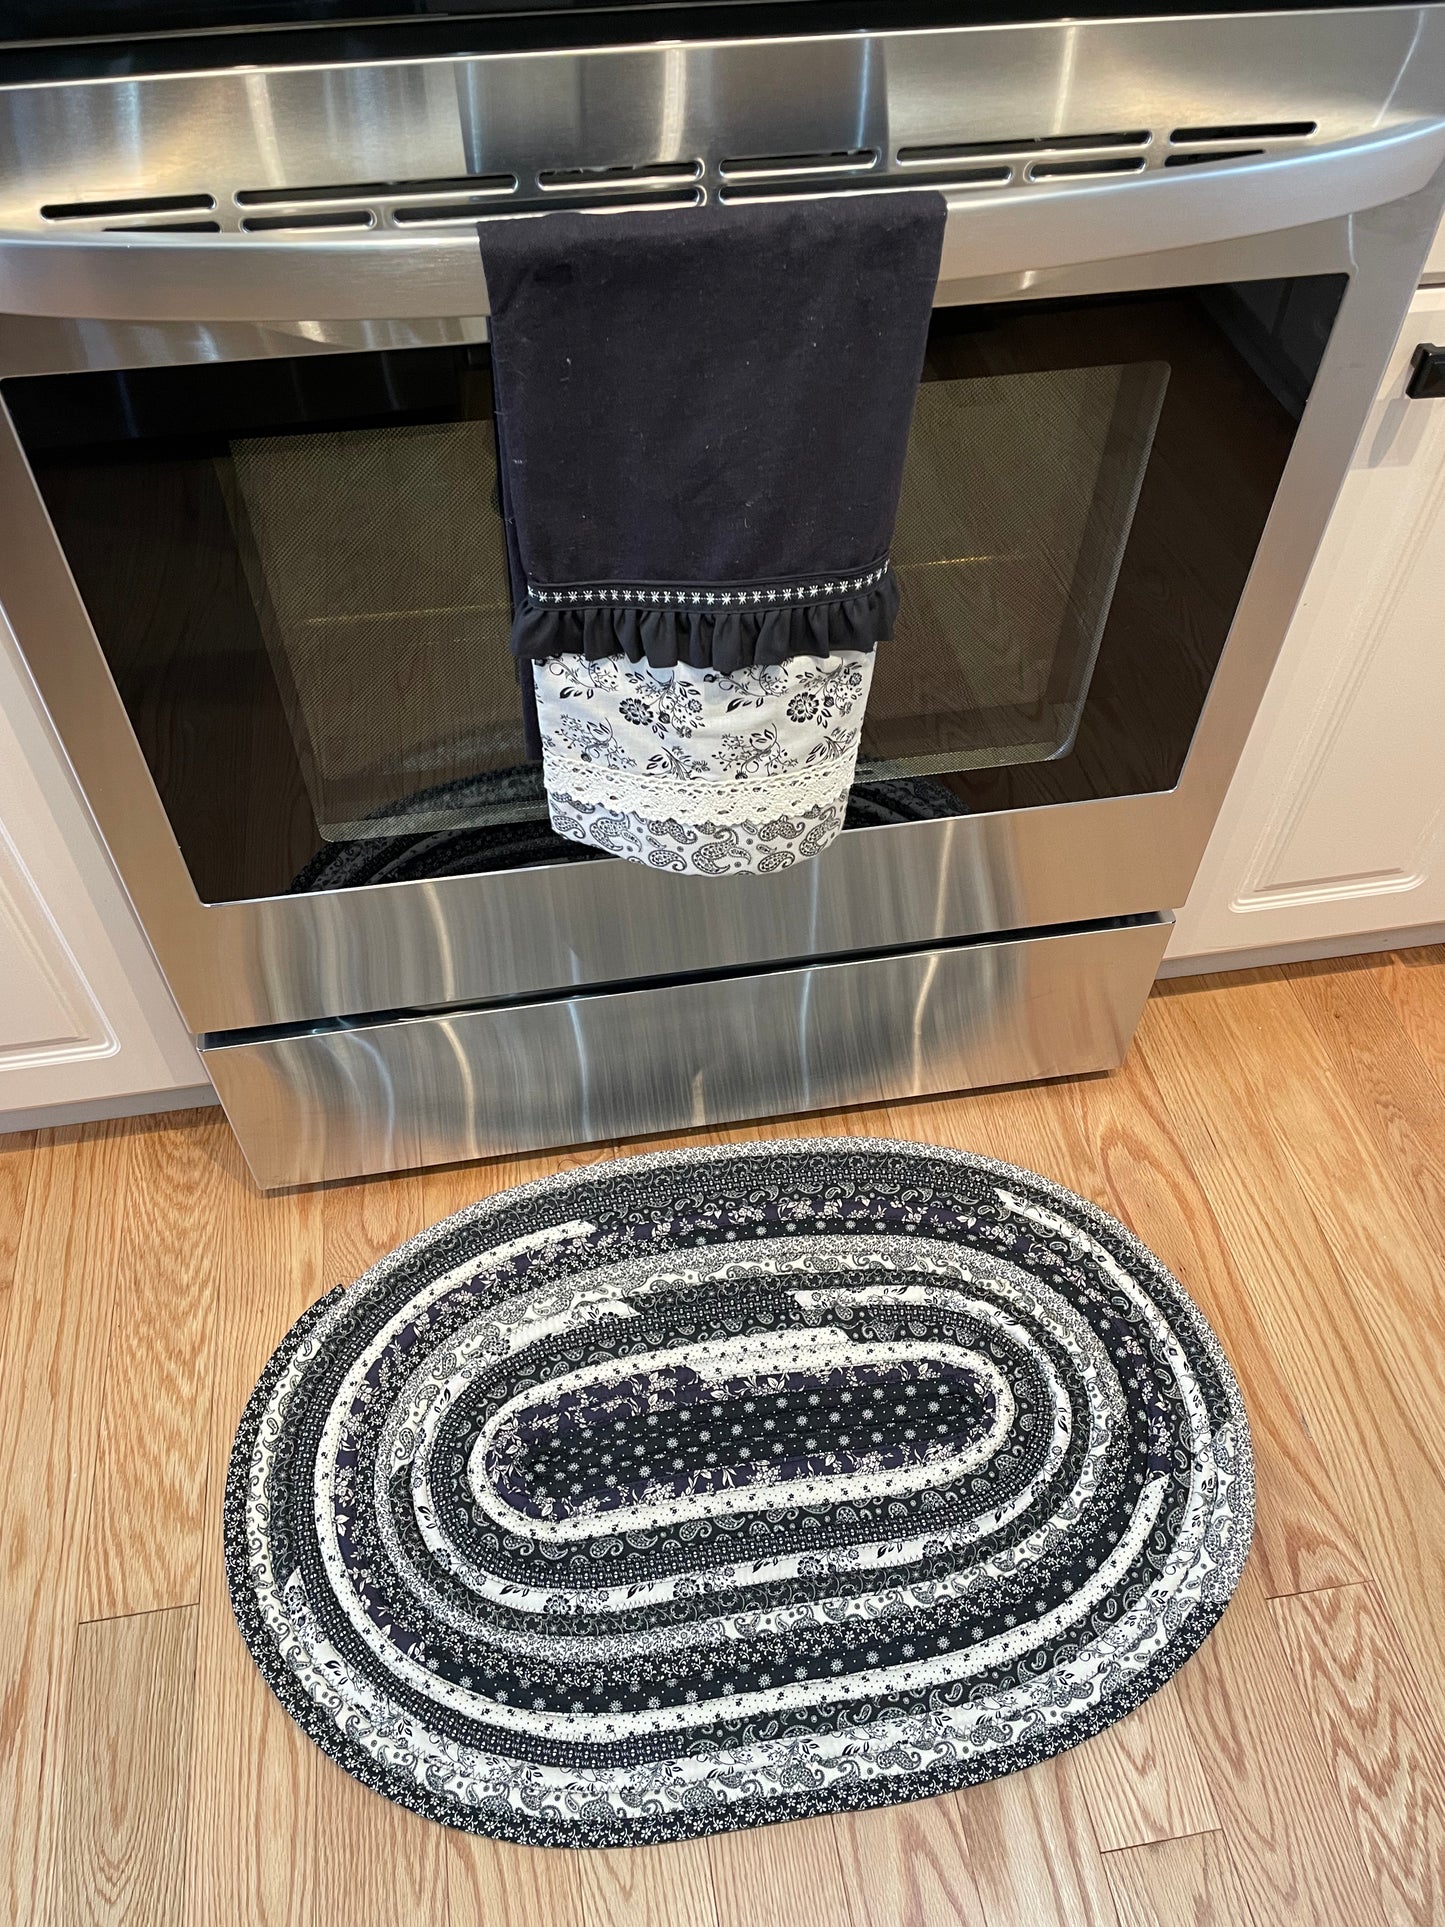 Black and Cream Kitchen Sink Accent Rug, Washable Cotton Rug For Kitchen or Bath